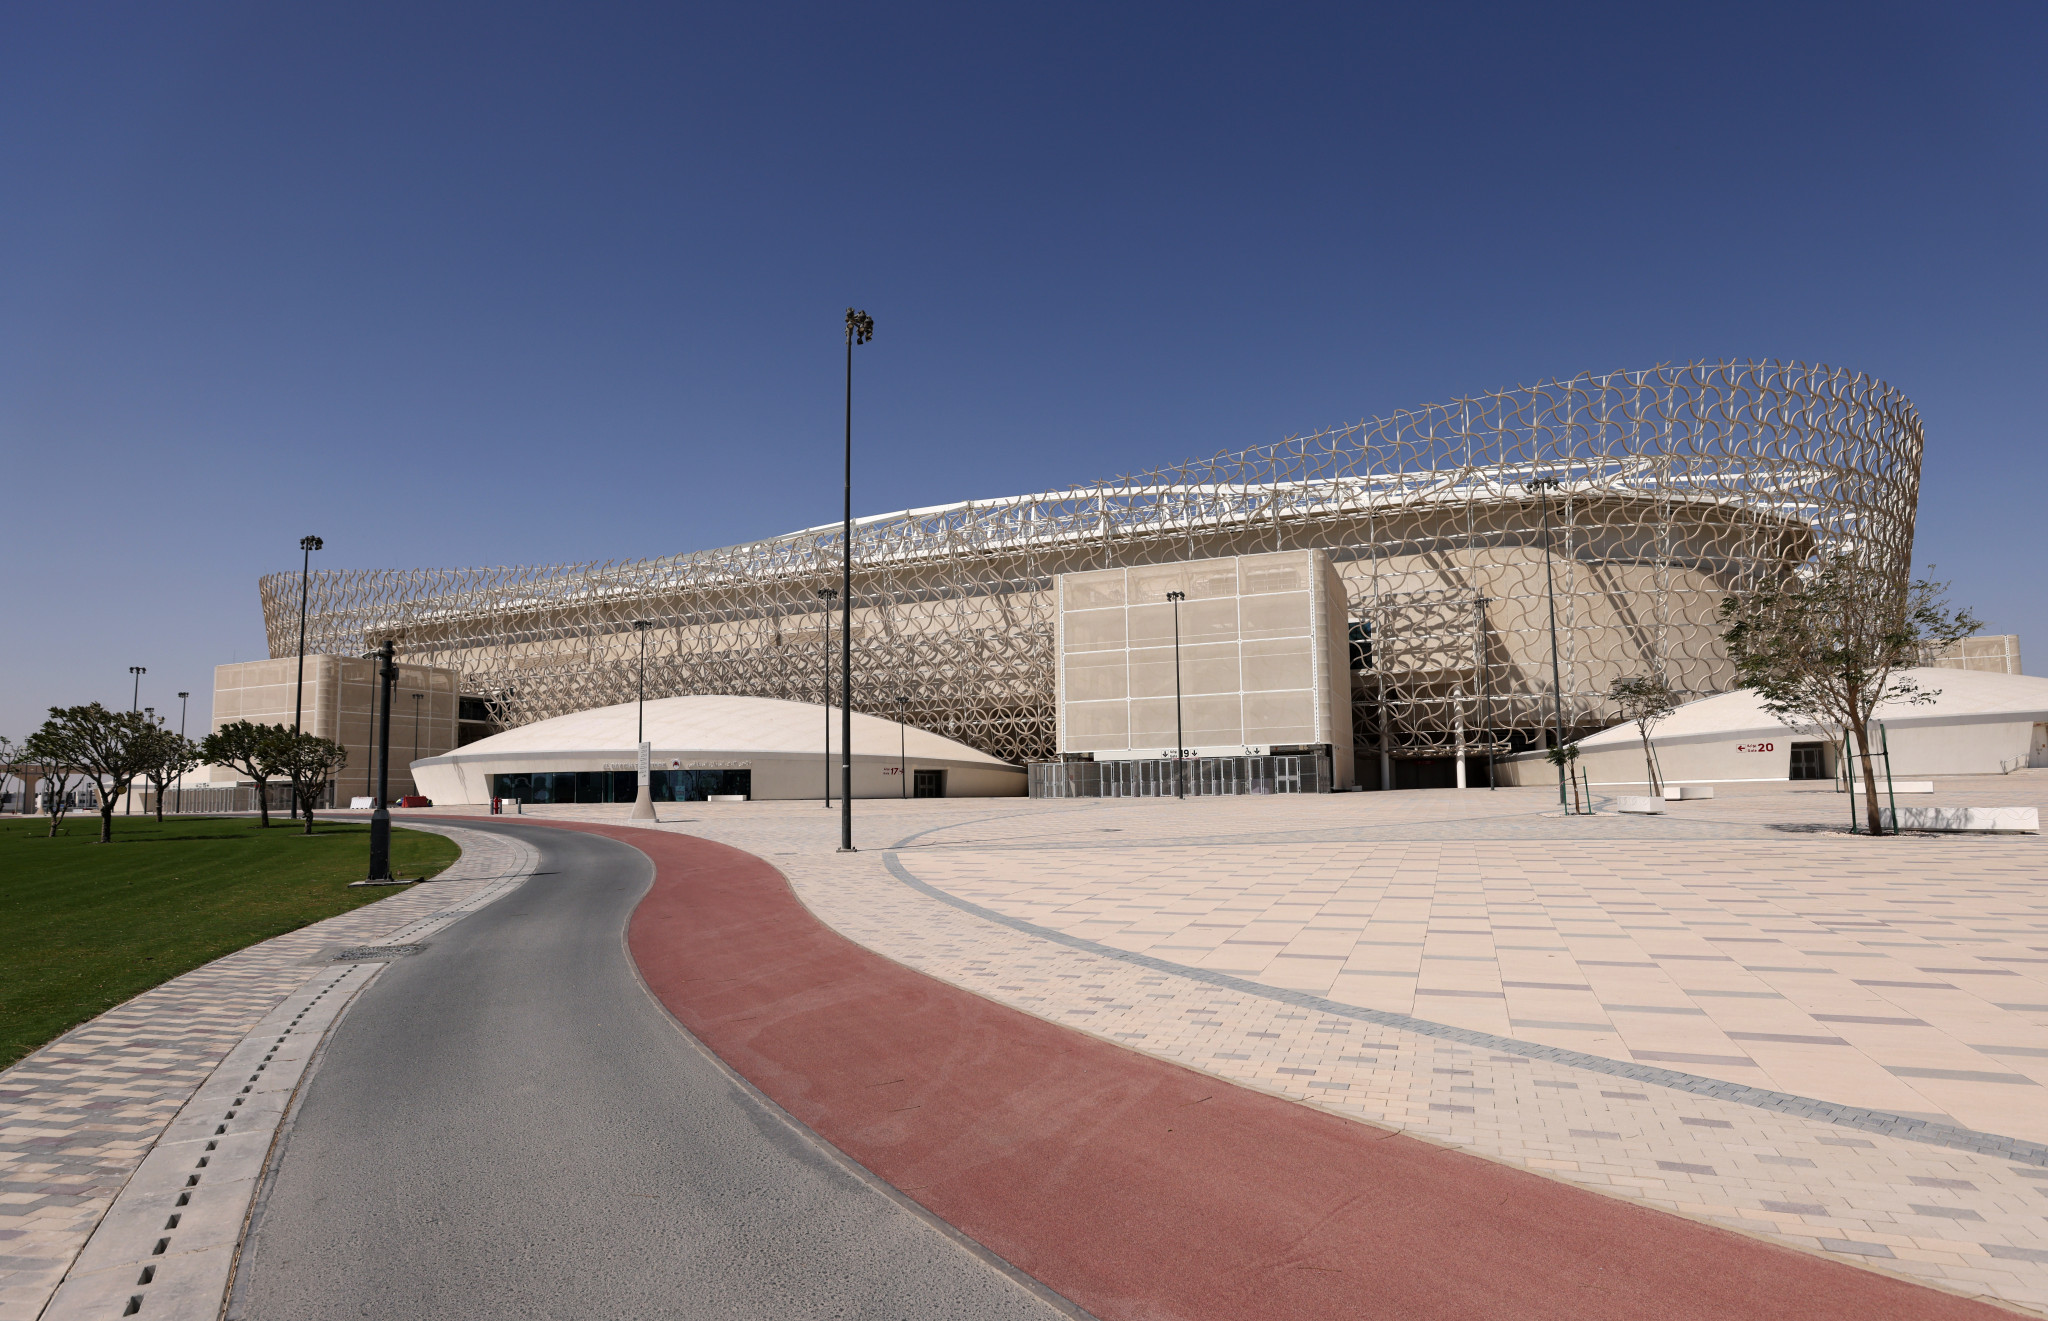 Concerns over workers rights have dominated the build-up to Qatar 2022 ©Getty Images